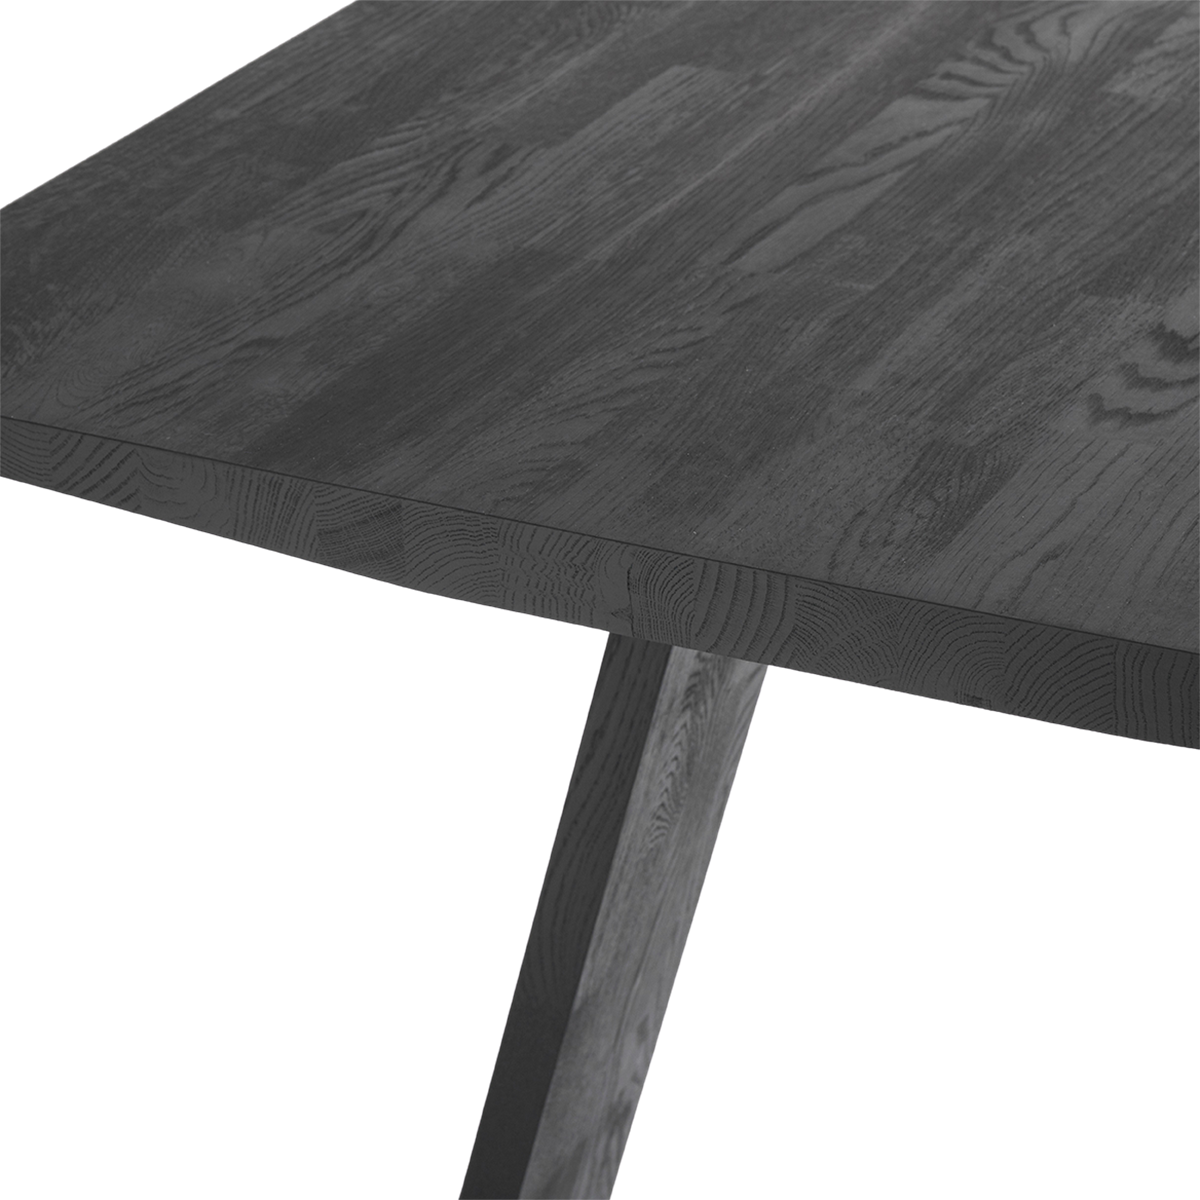 Dining Table Angle black